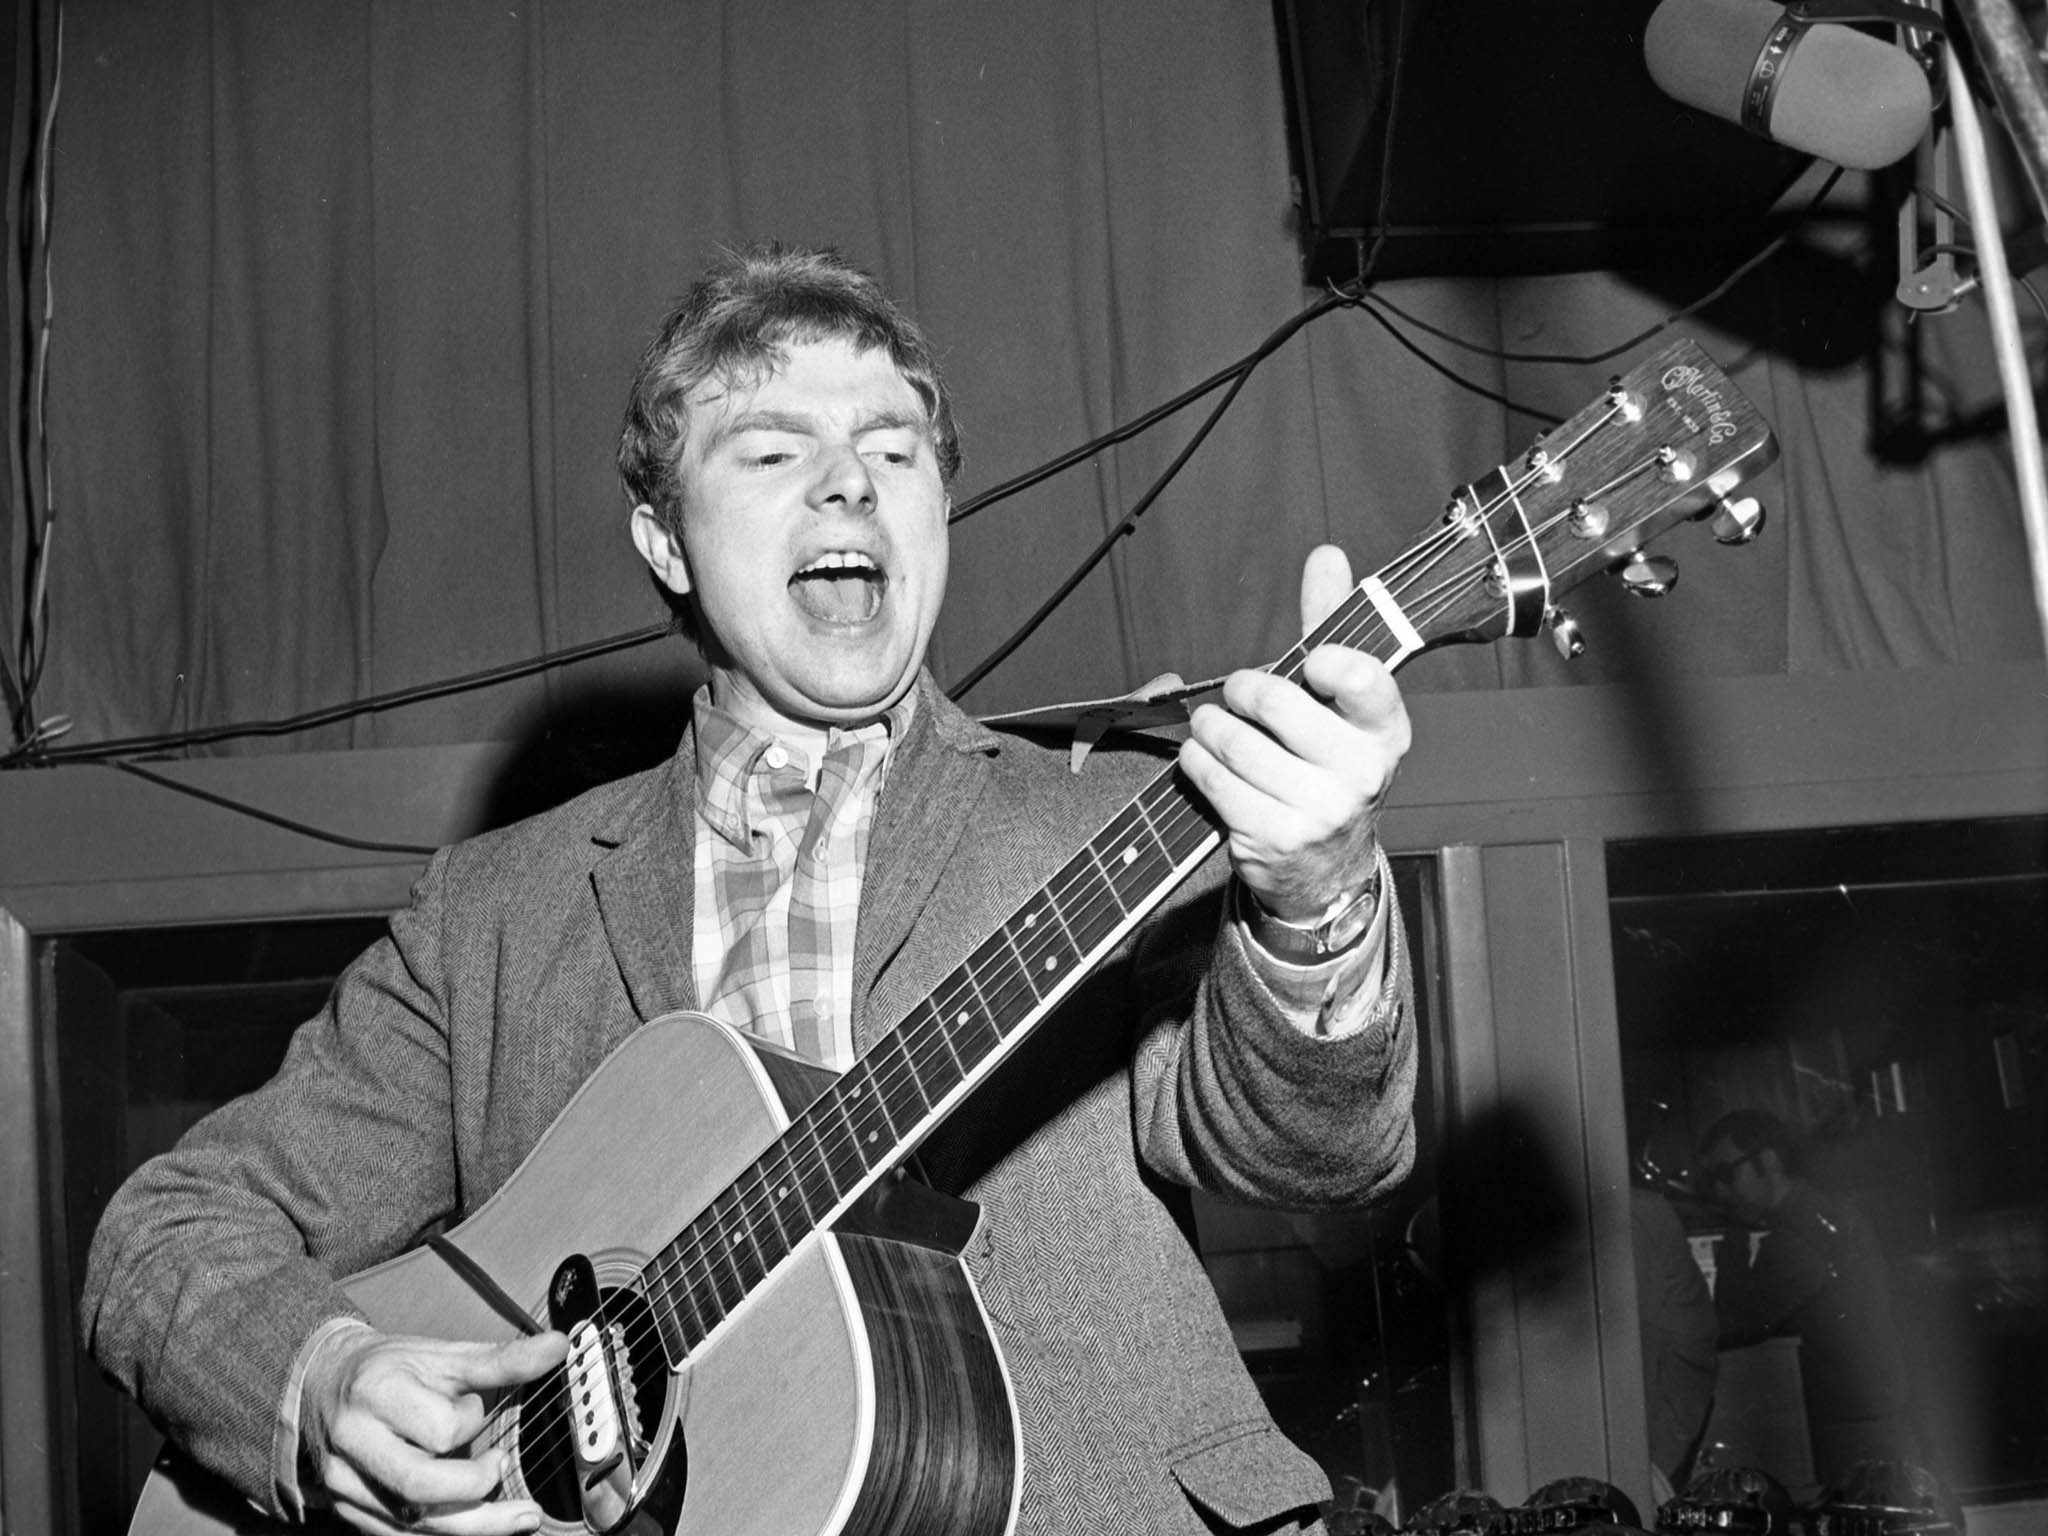 Van Morrison plays a Martin acoustic guitar at a Bang Records recording session in 1967